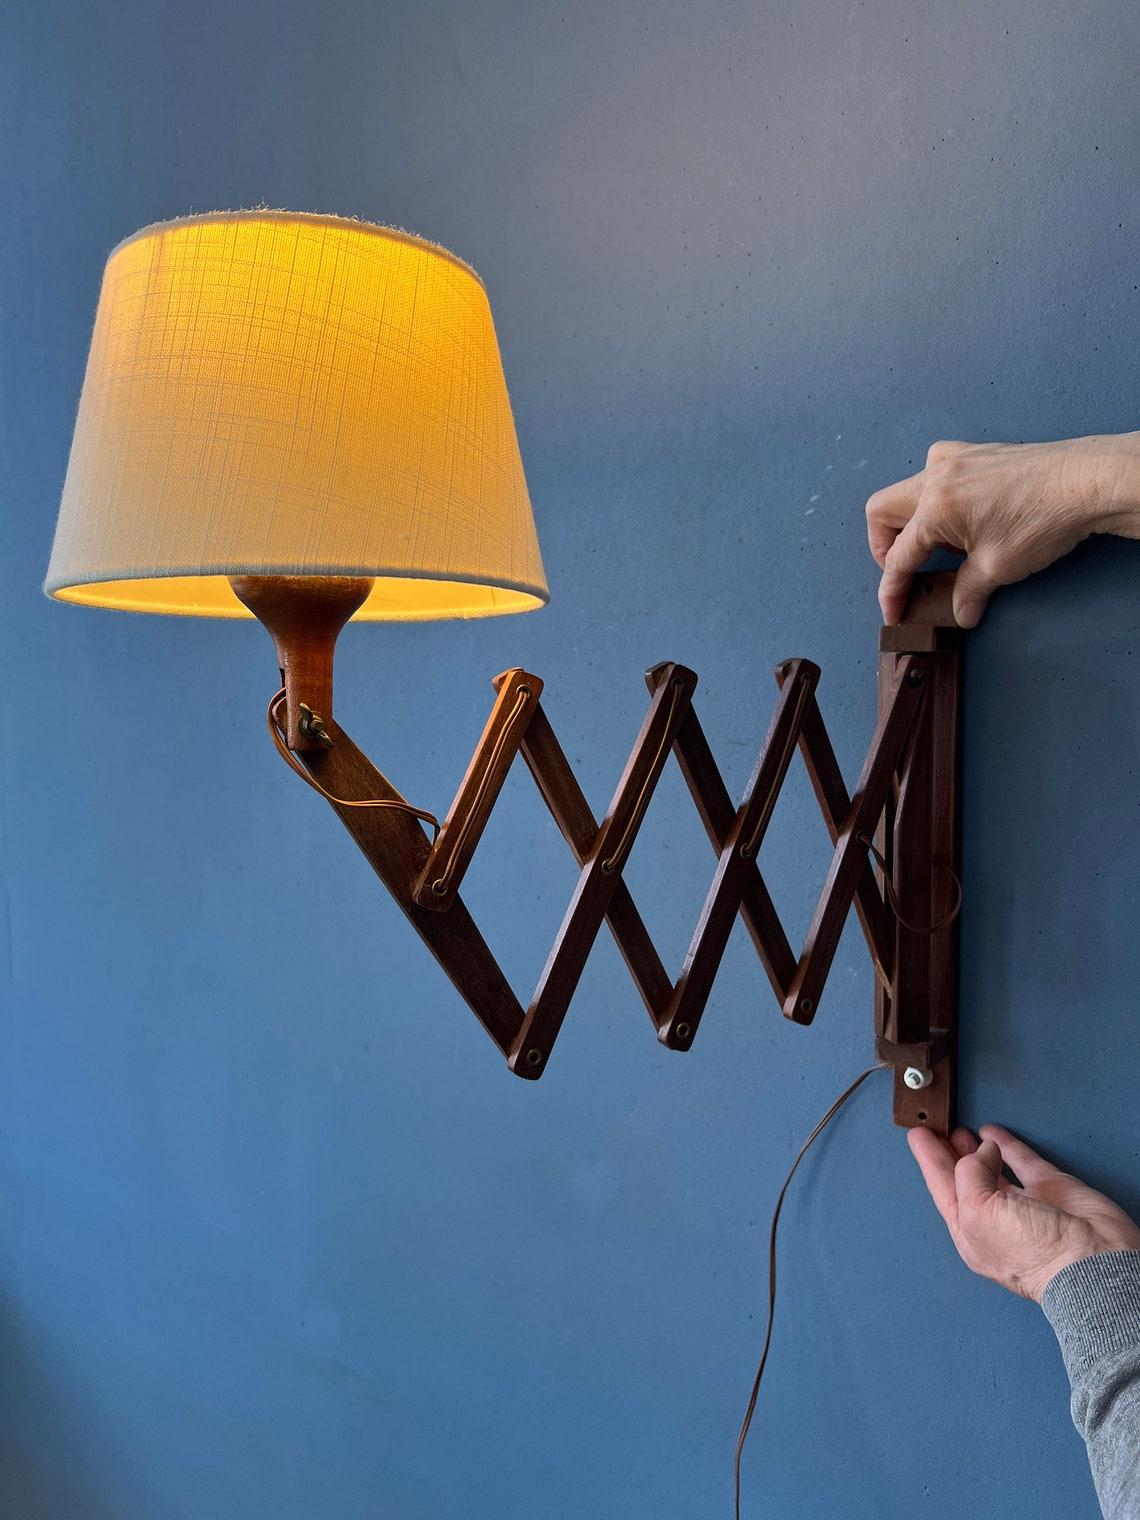 Danish style teak wood scissor lamp with wooden frame and beige textile shade. The scissor-mechanism allows you to extend the lamp from the wall. The shade itself can be adjusted too. The lamp requires an E27/26 (standard) lightbulb and currently